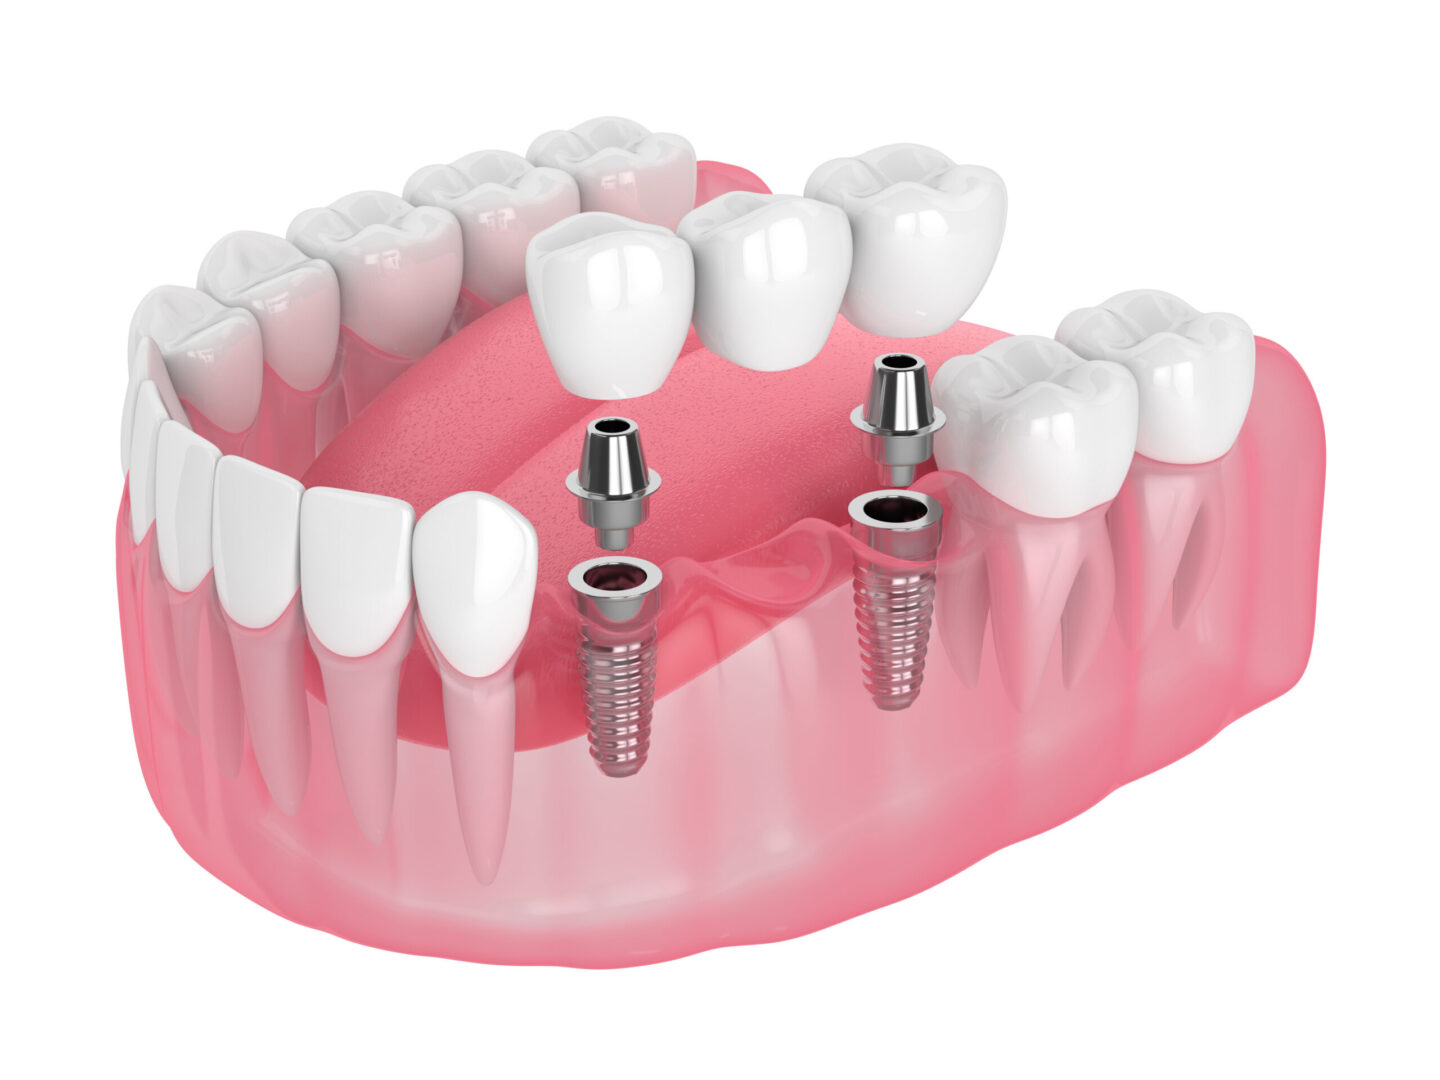 dental implant bridge utilizes the jawbone for stability at Aspire Surgical in Salt Lake City, UT